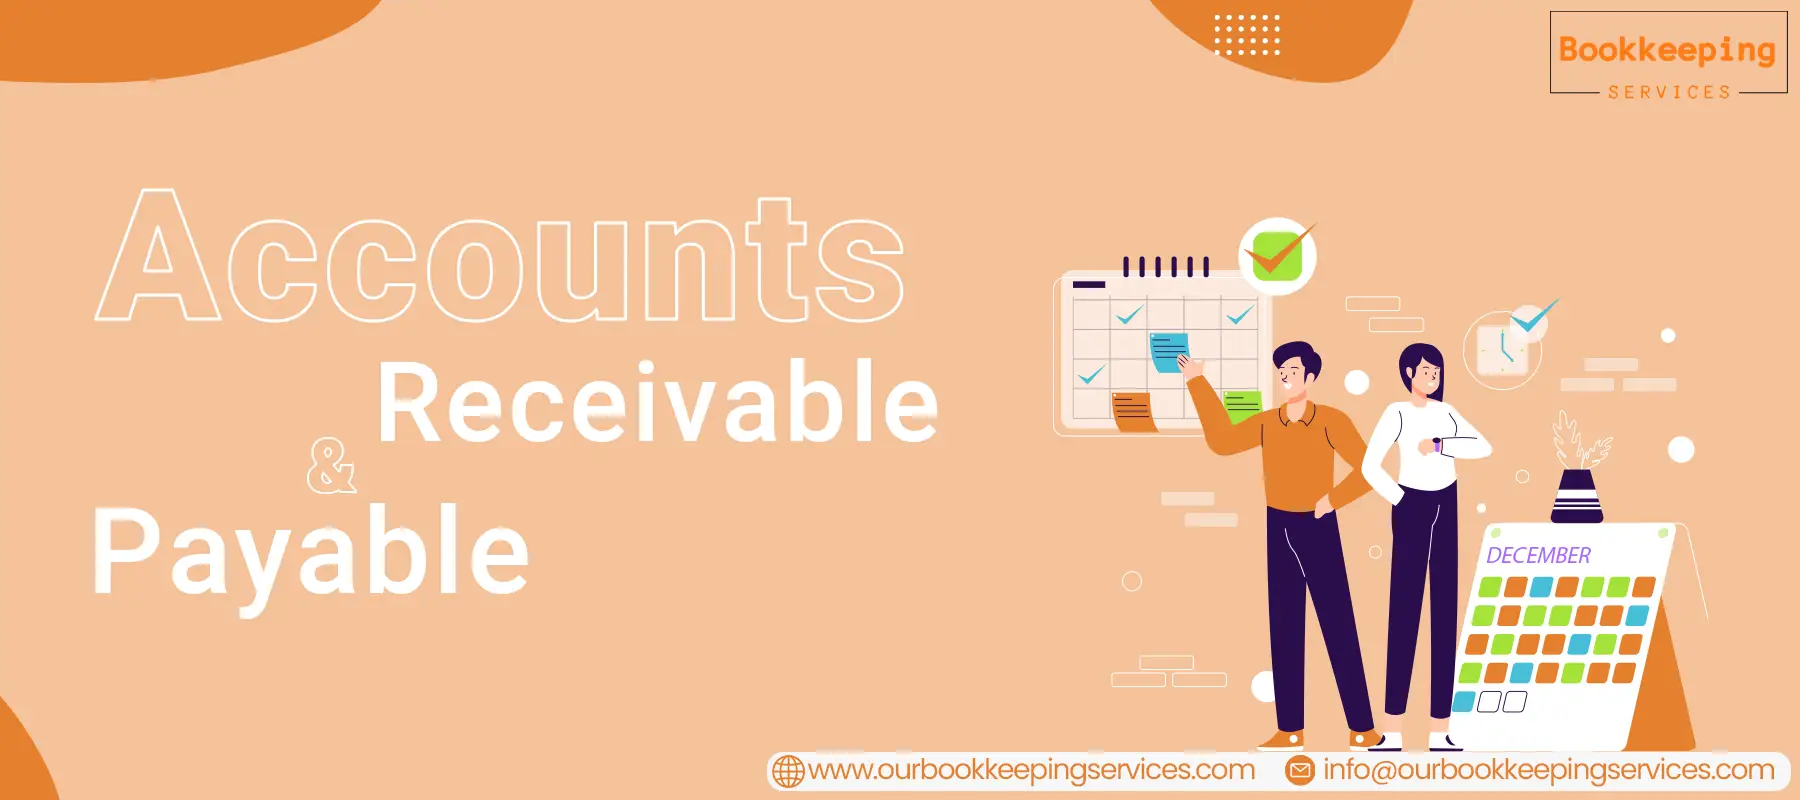 Pay attention to accounts receivable and payable